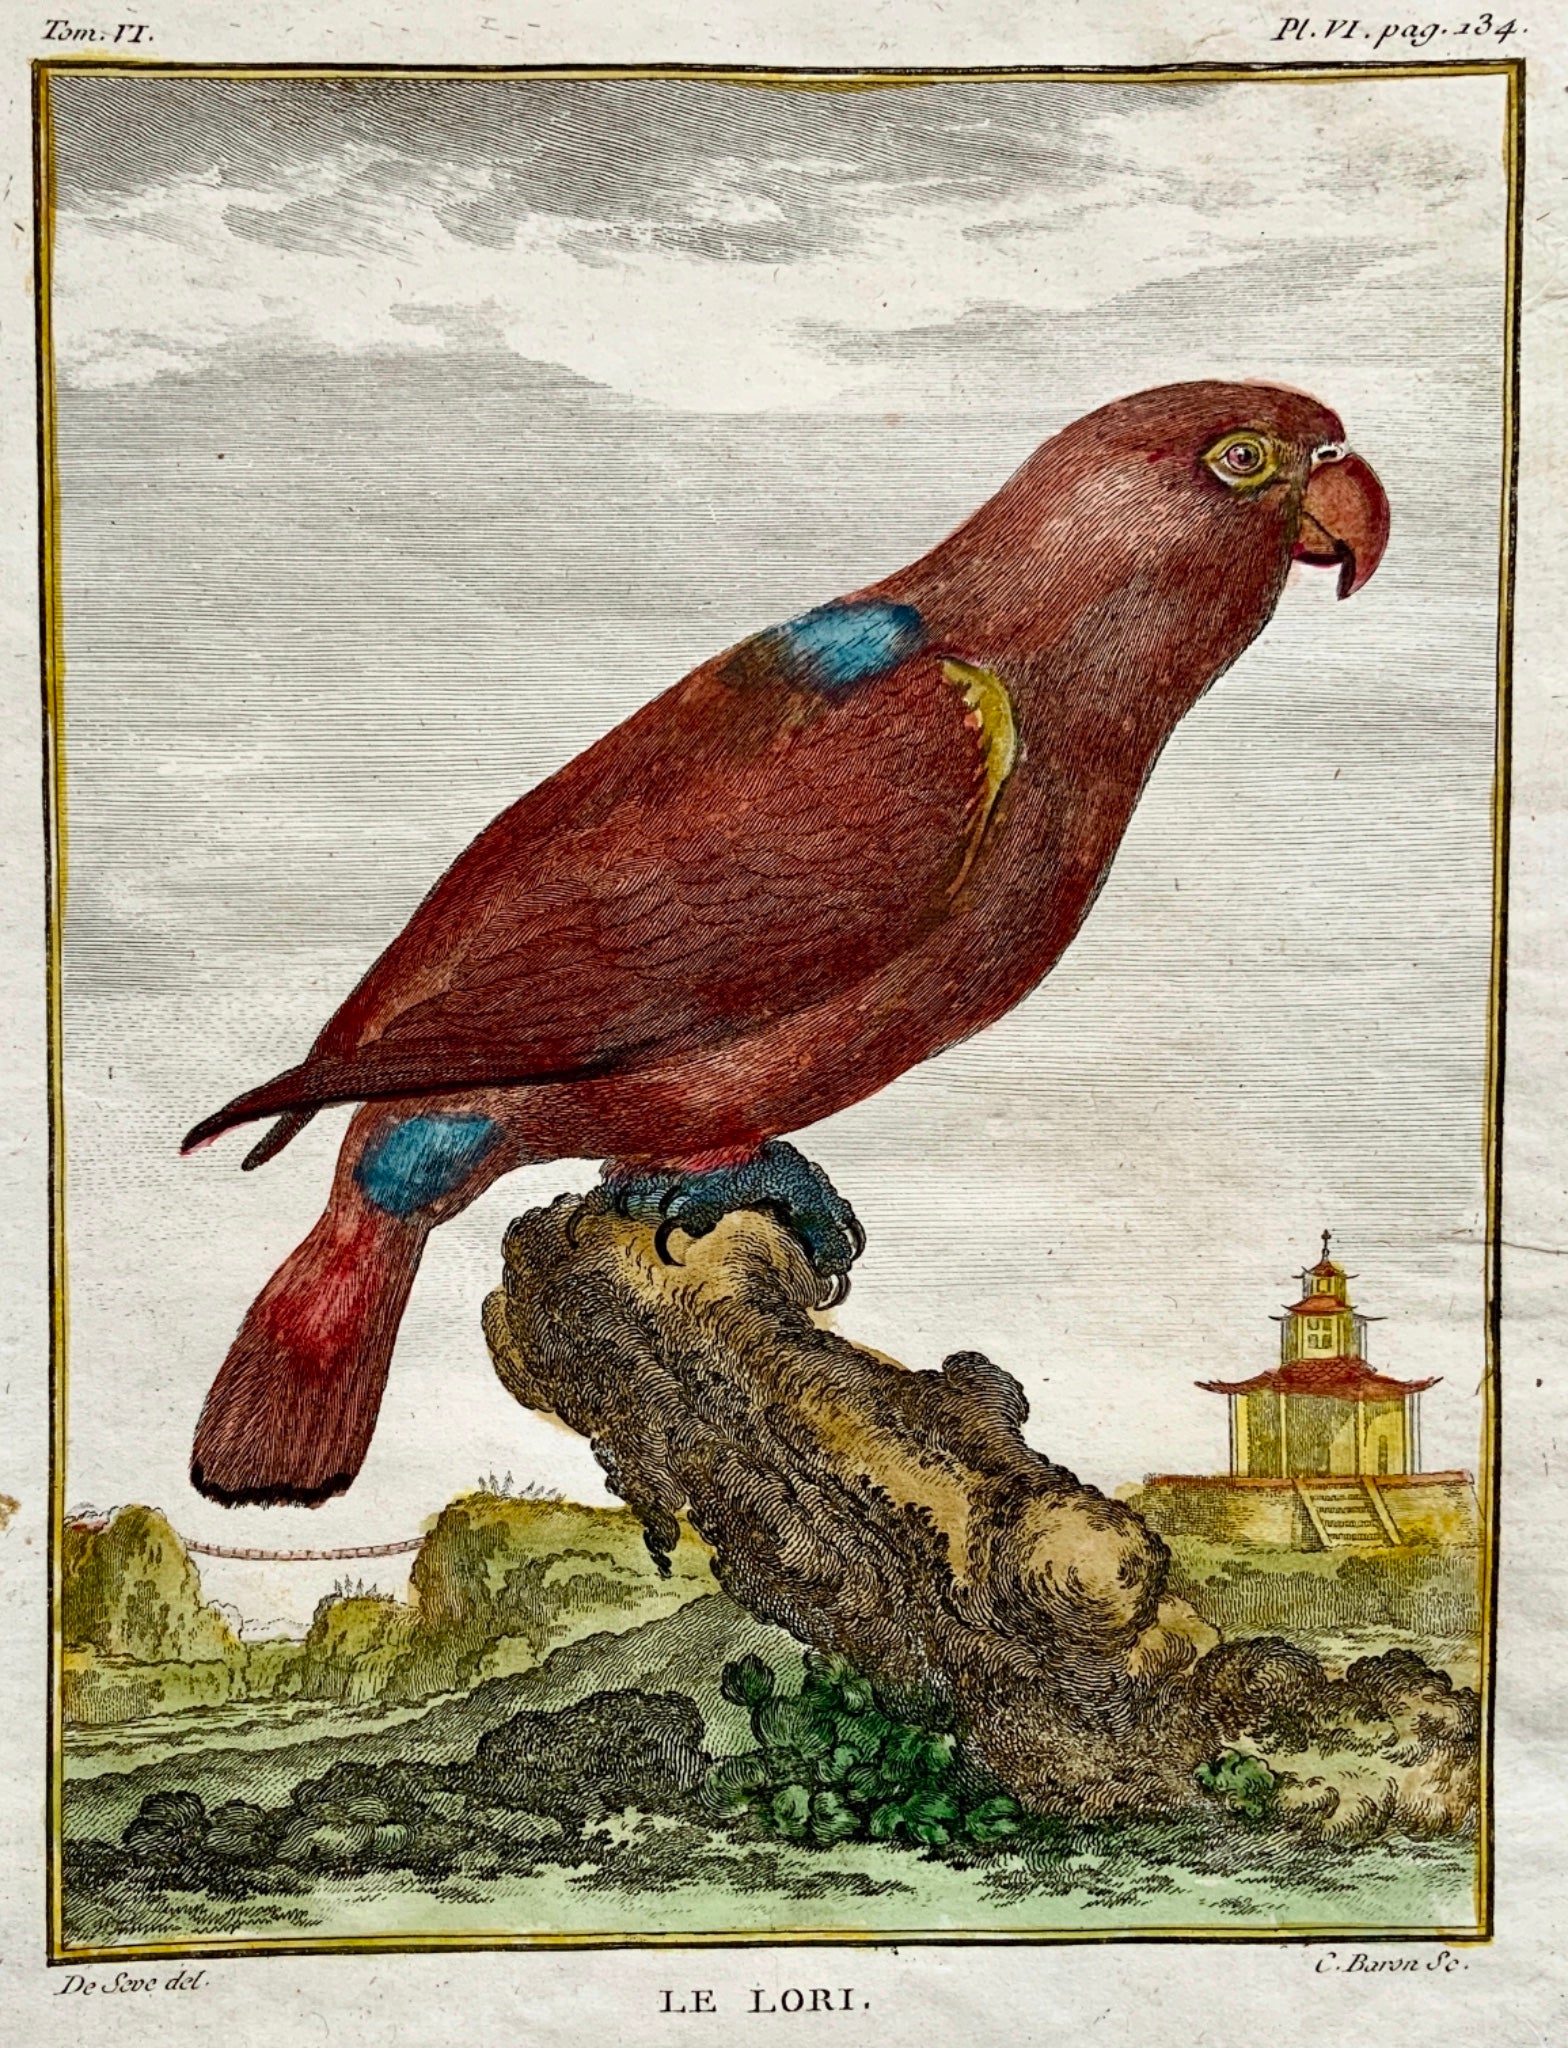 1779 Haussard after Jacques de Seve - Lory Parrot - 4to engraving - Ornithology